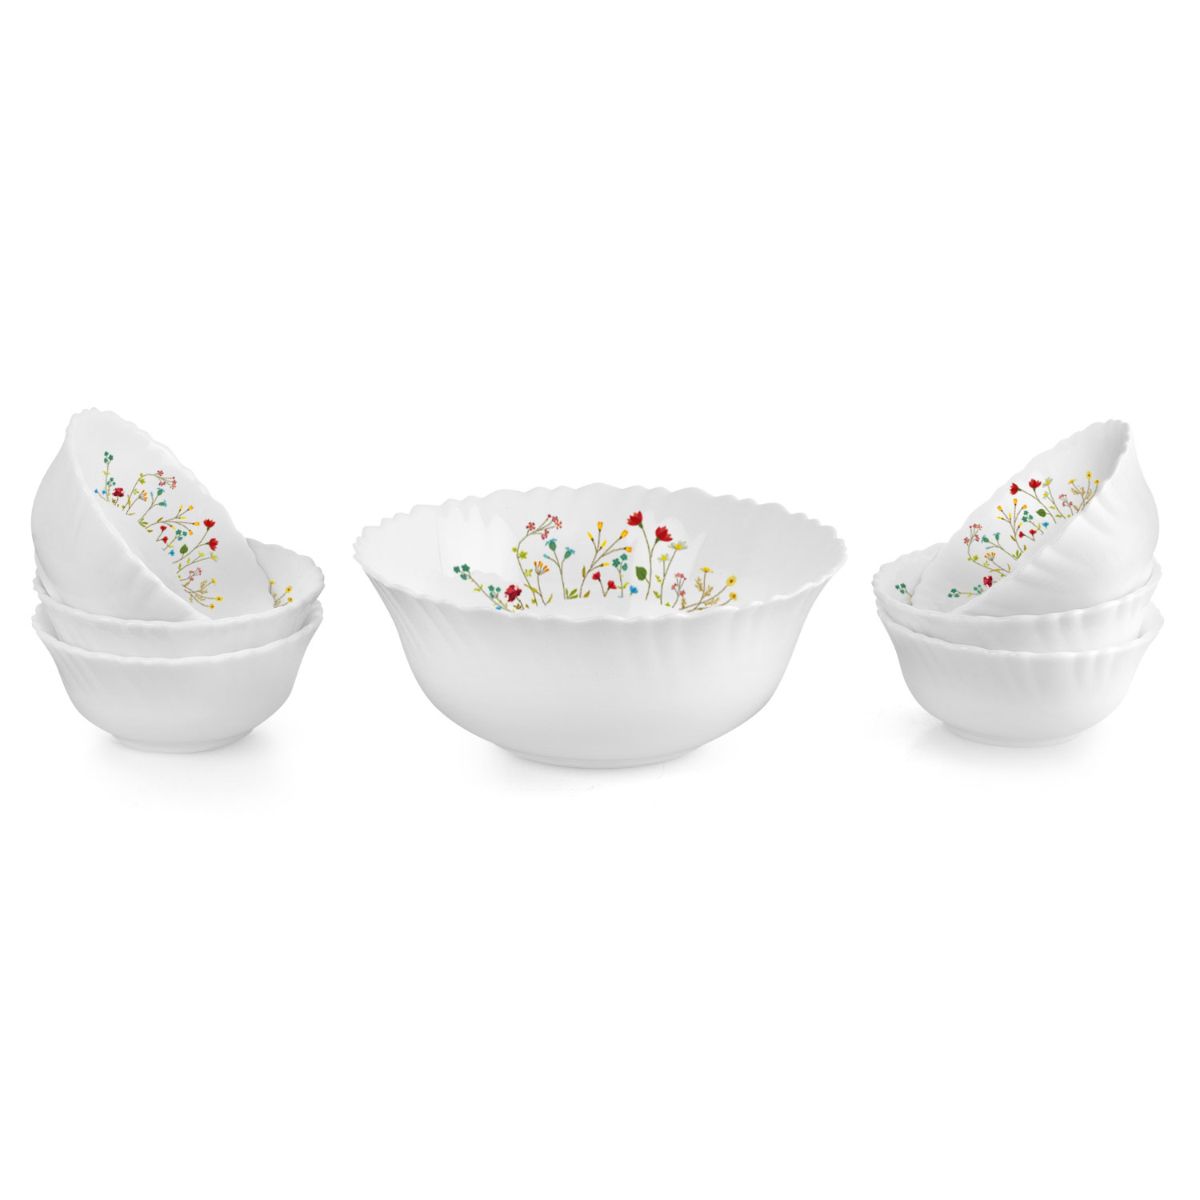 Dazzle Series Pudding Gift Set, 7 Pieces Hanging Garden / 7 Pieces